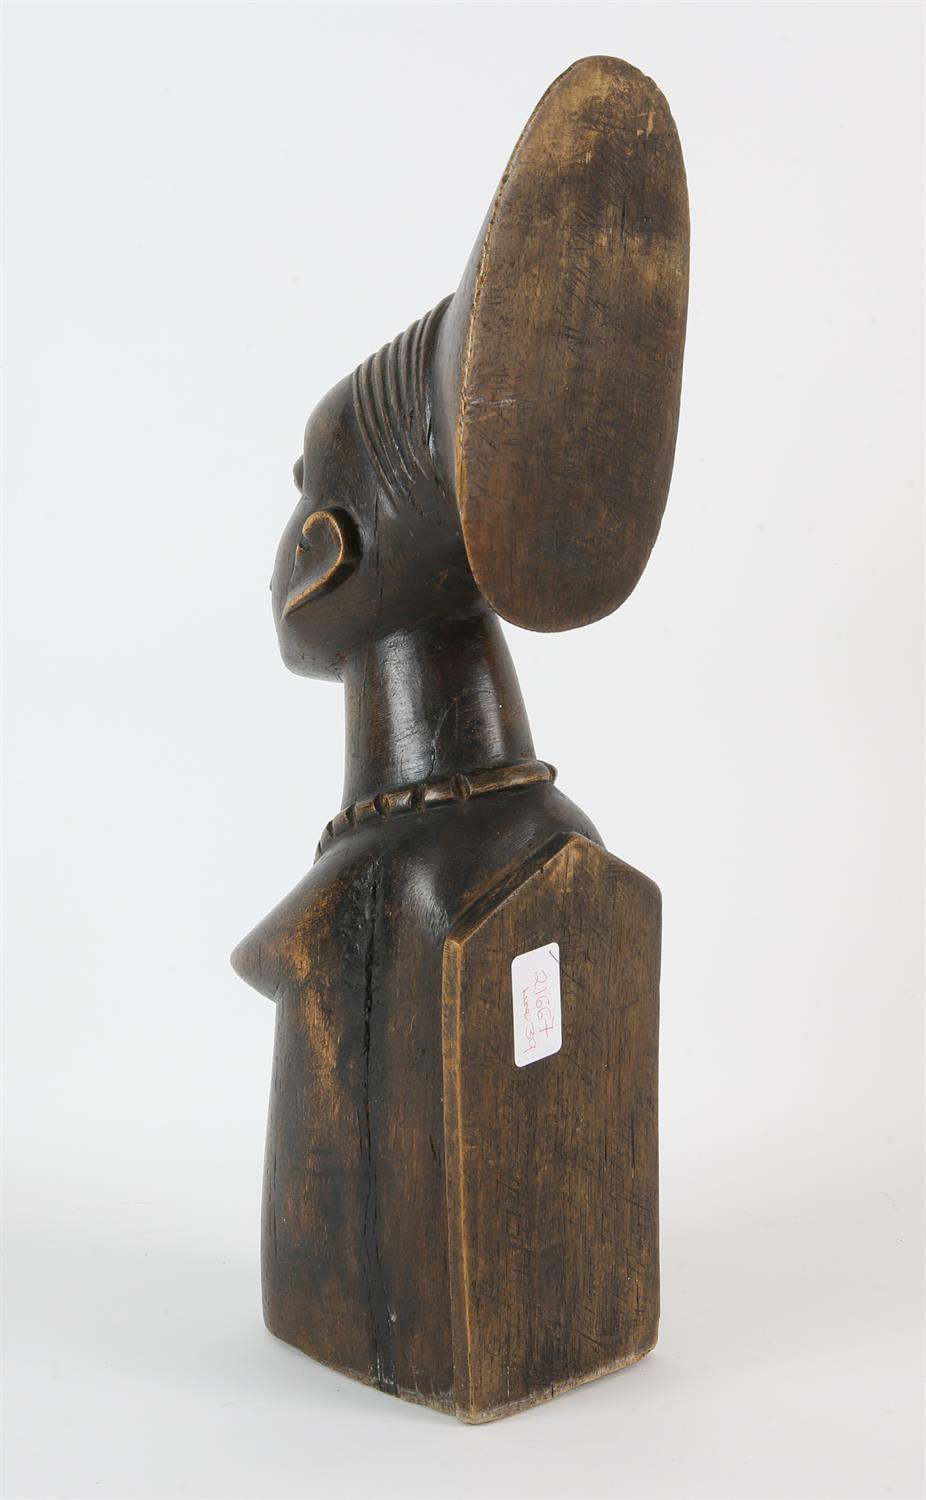 An African Ethnographic-style figure of a women, wearing a necklace, 43.5 cm high - Image 2 of 2